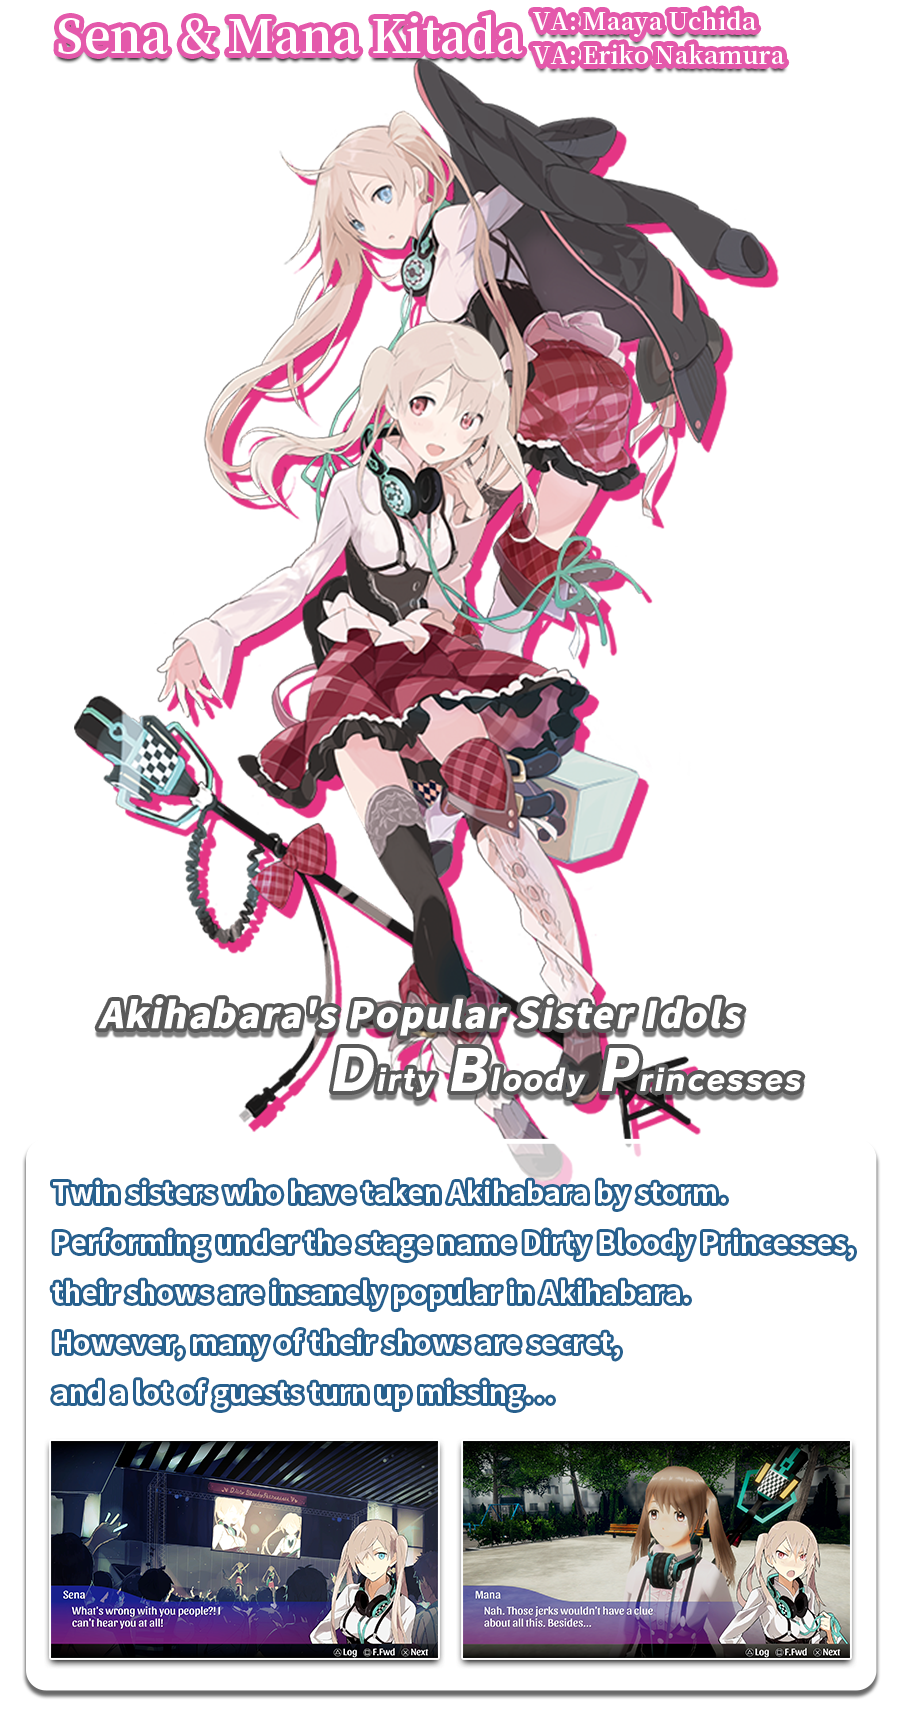 Twin sisters who have taken Akihabara by storm. Performing under the stage name Dirty Bloody Princesses, their shows are insanely popular in Akihabara. However, many of their shows are secret, and a lot of guests turn up missing…